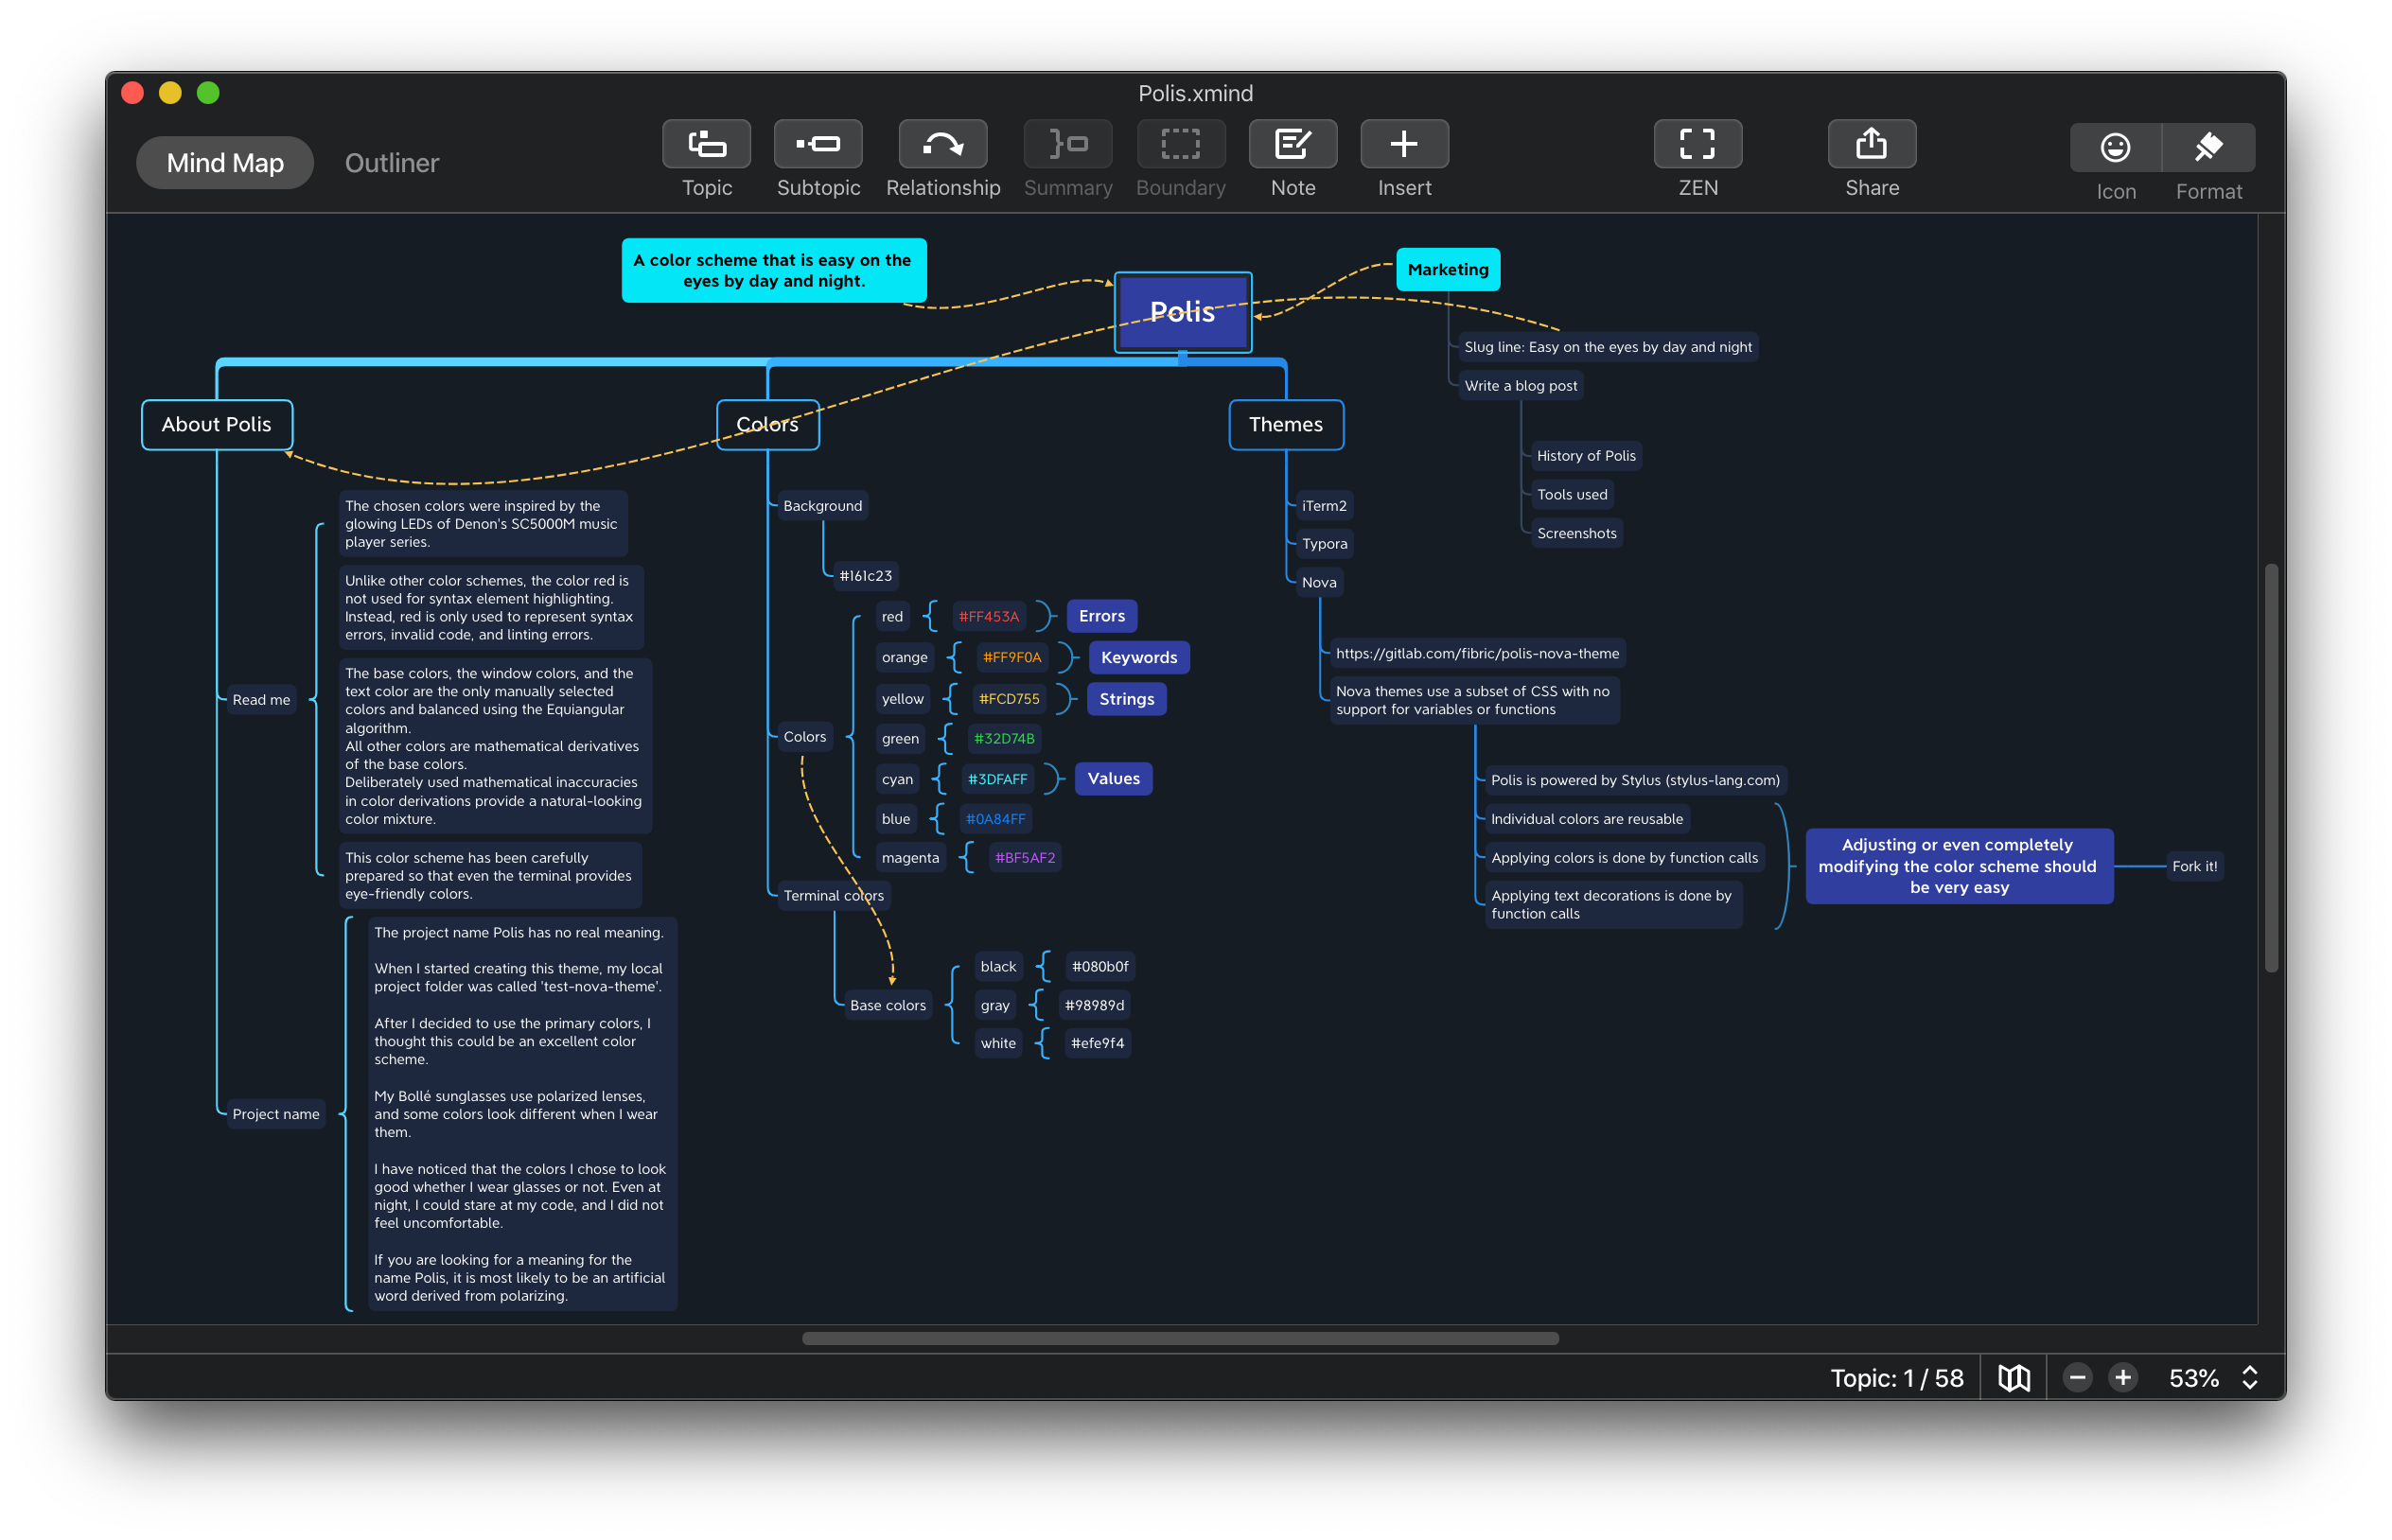 Polis mindmap outlining some of the key parts such as README.md content, colors, and themes for other applications